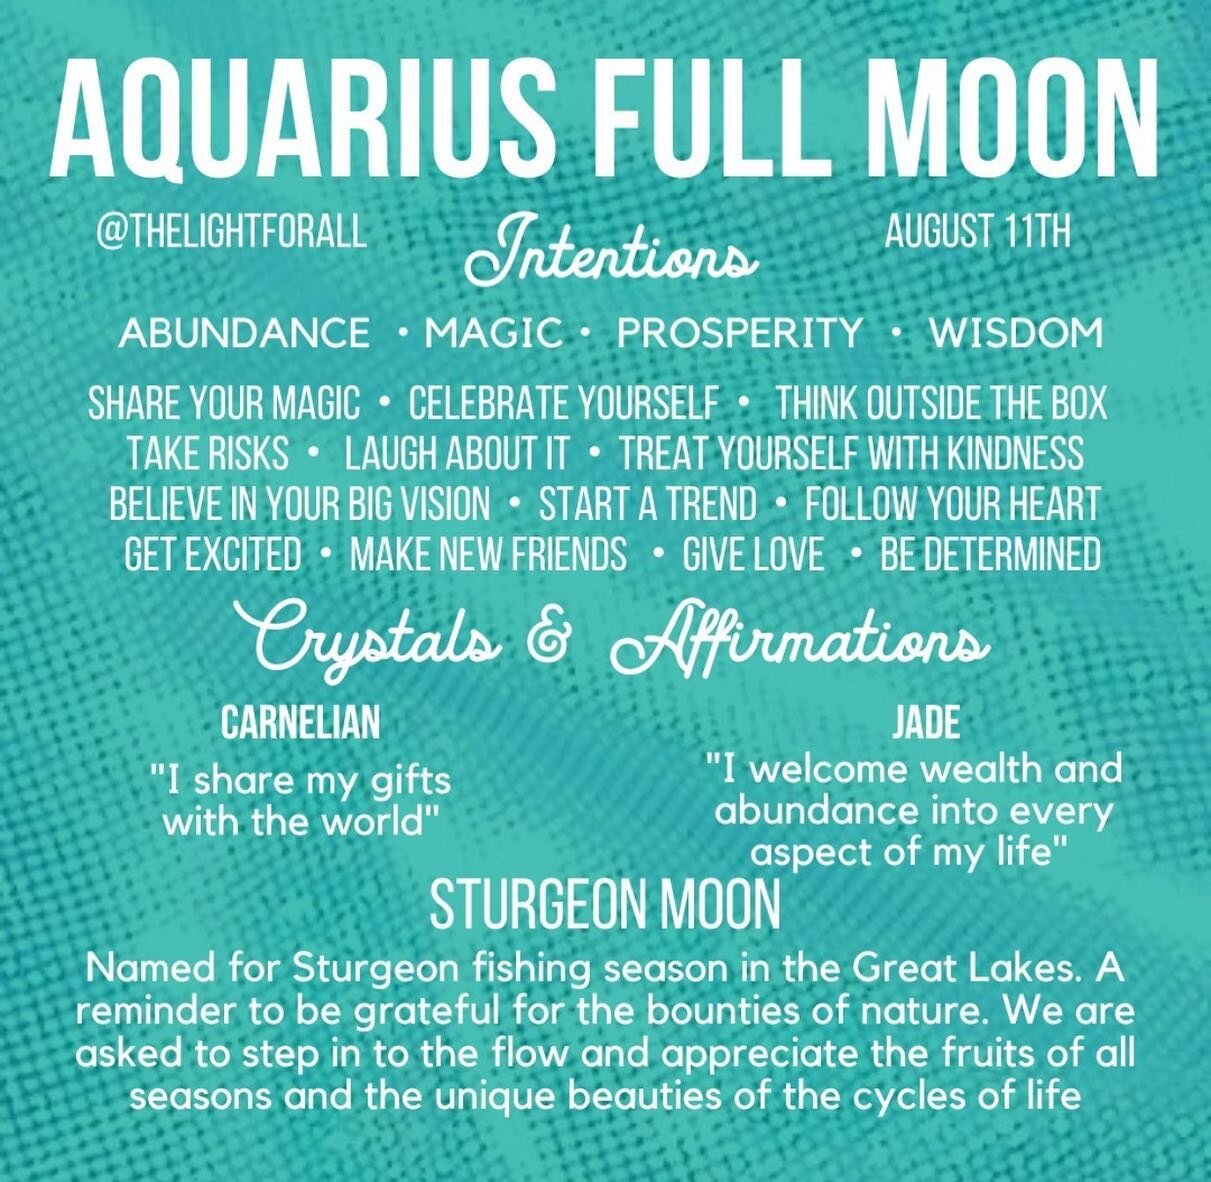 AQUARIUS FULL MOON

8.11.22

Did you catch a glimpse of the moon last night? Our last super moon of 2022 also known as #sturgeonmoon. 🌕

During #fullmooninaquarius, I encourage you to become keenly aware of how you are influenced by society. How hav